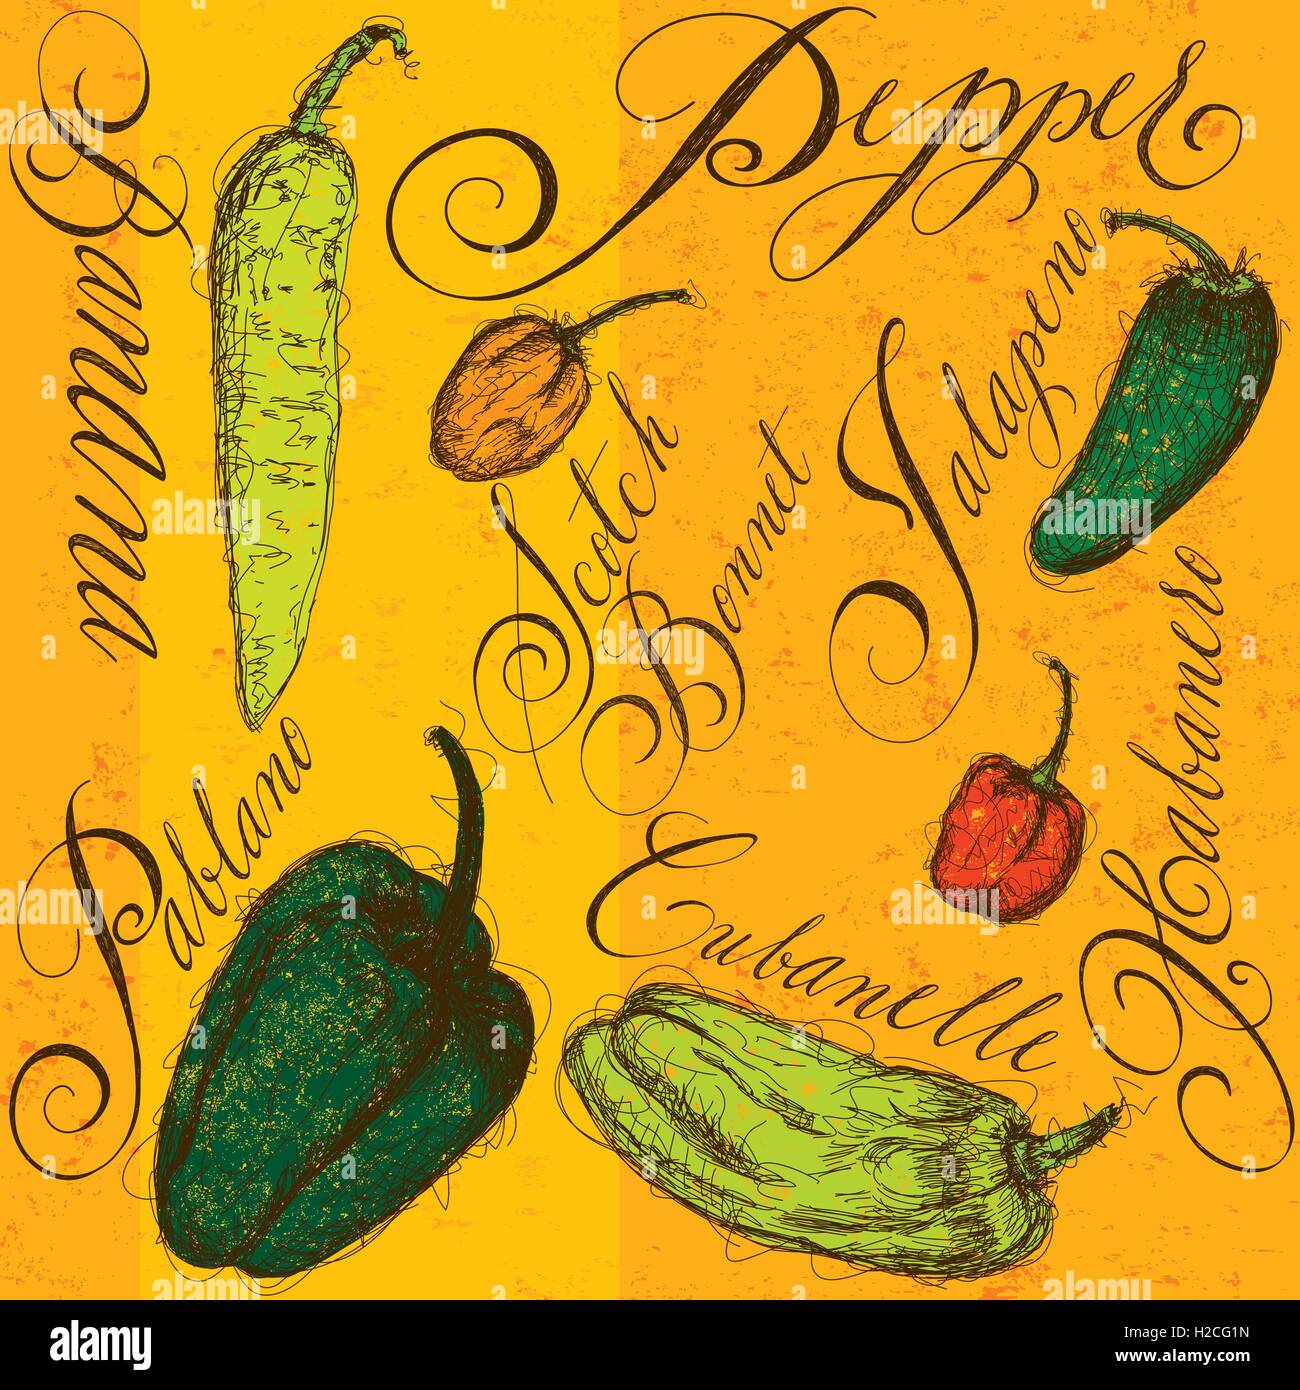 Chili peppers with calligraphy  The peppers are habanero, jalapeno, cubanelle, banana, scotch bonnet, and pablano. Stock Vector